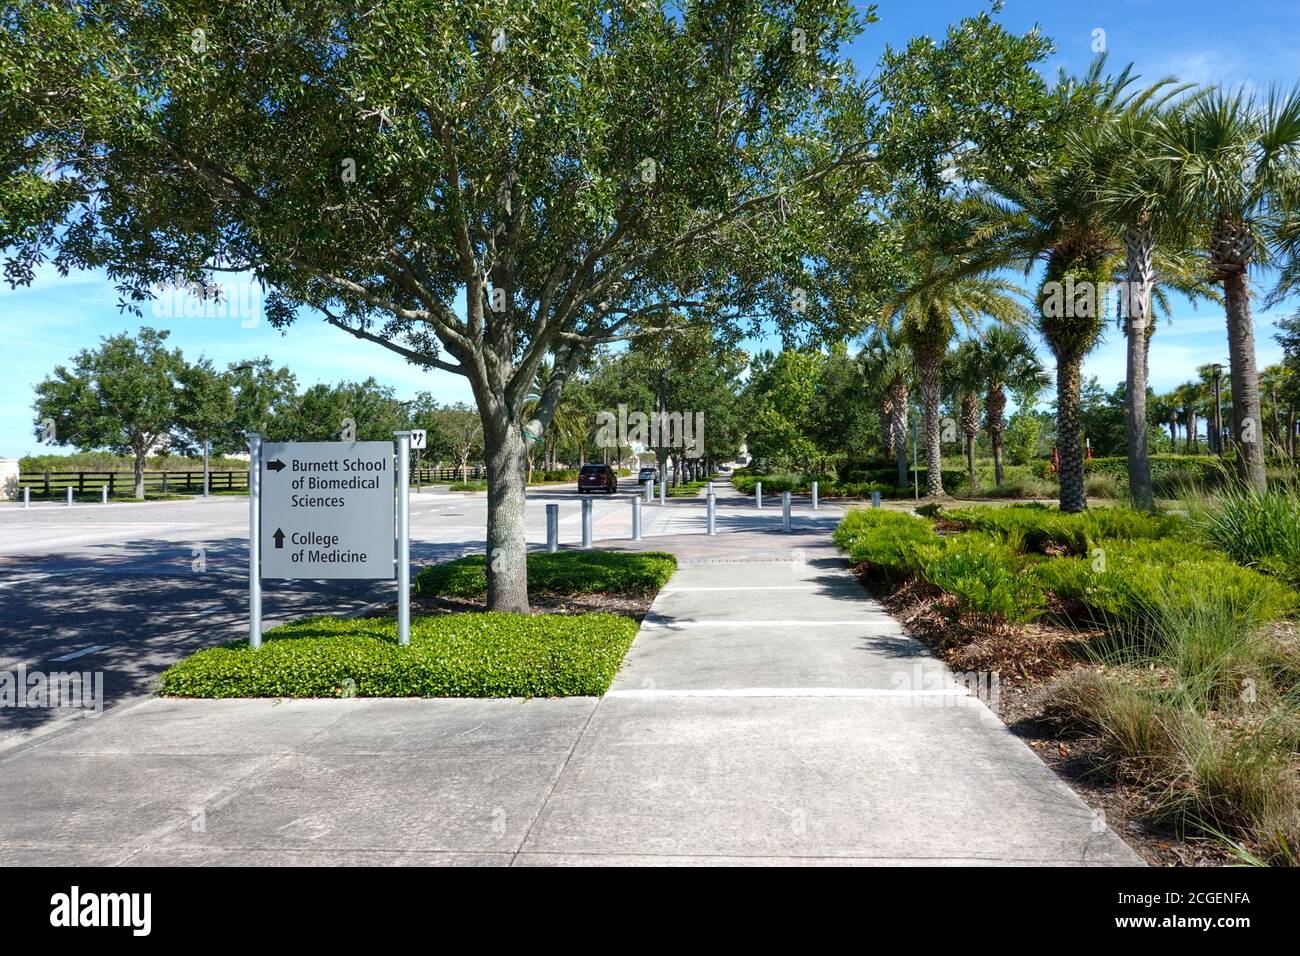 Orlando,FL/USA -5/7/20:  The directional sign pointing to Burnett School of Biomedical Sciences and the College of Medicine at the University of Centr Stock Photo